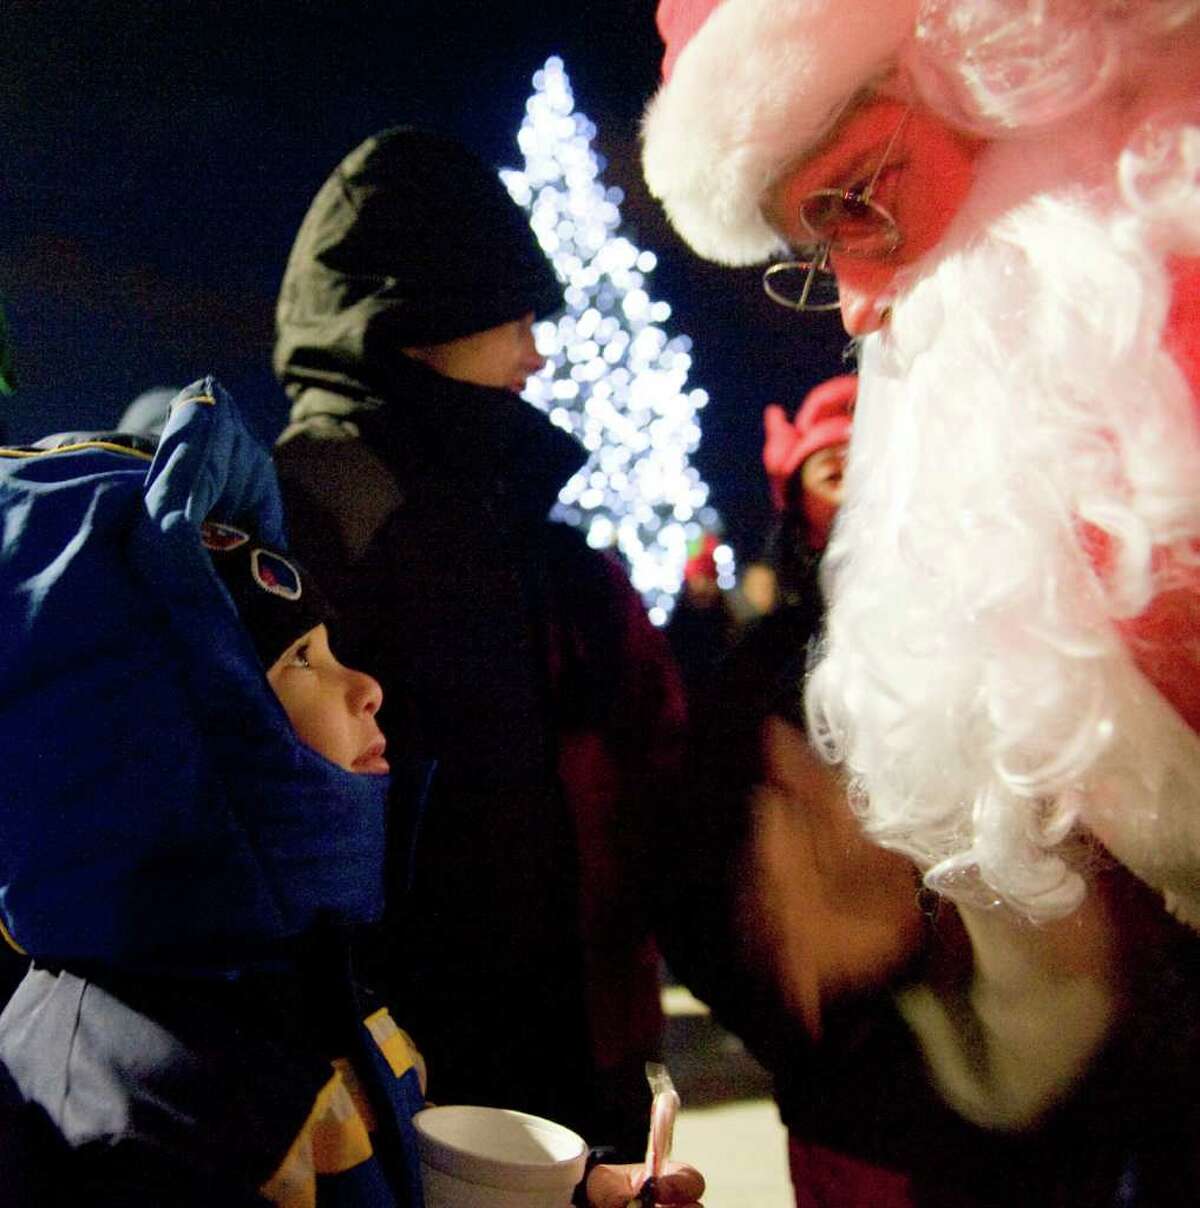 Malaki Benotmane, 4, chats with Santa Claus as Building and Land Technology, the developer of Harbor Point, hosts a tree-lighting ceremony for the first time in Commons Park, a public space newly built as part of Harbor Point in Stamford, Conn., Monday, December 6, 2010.